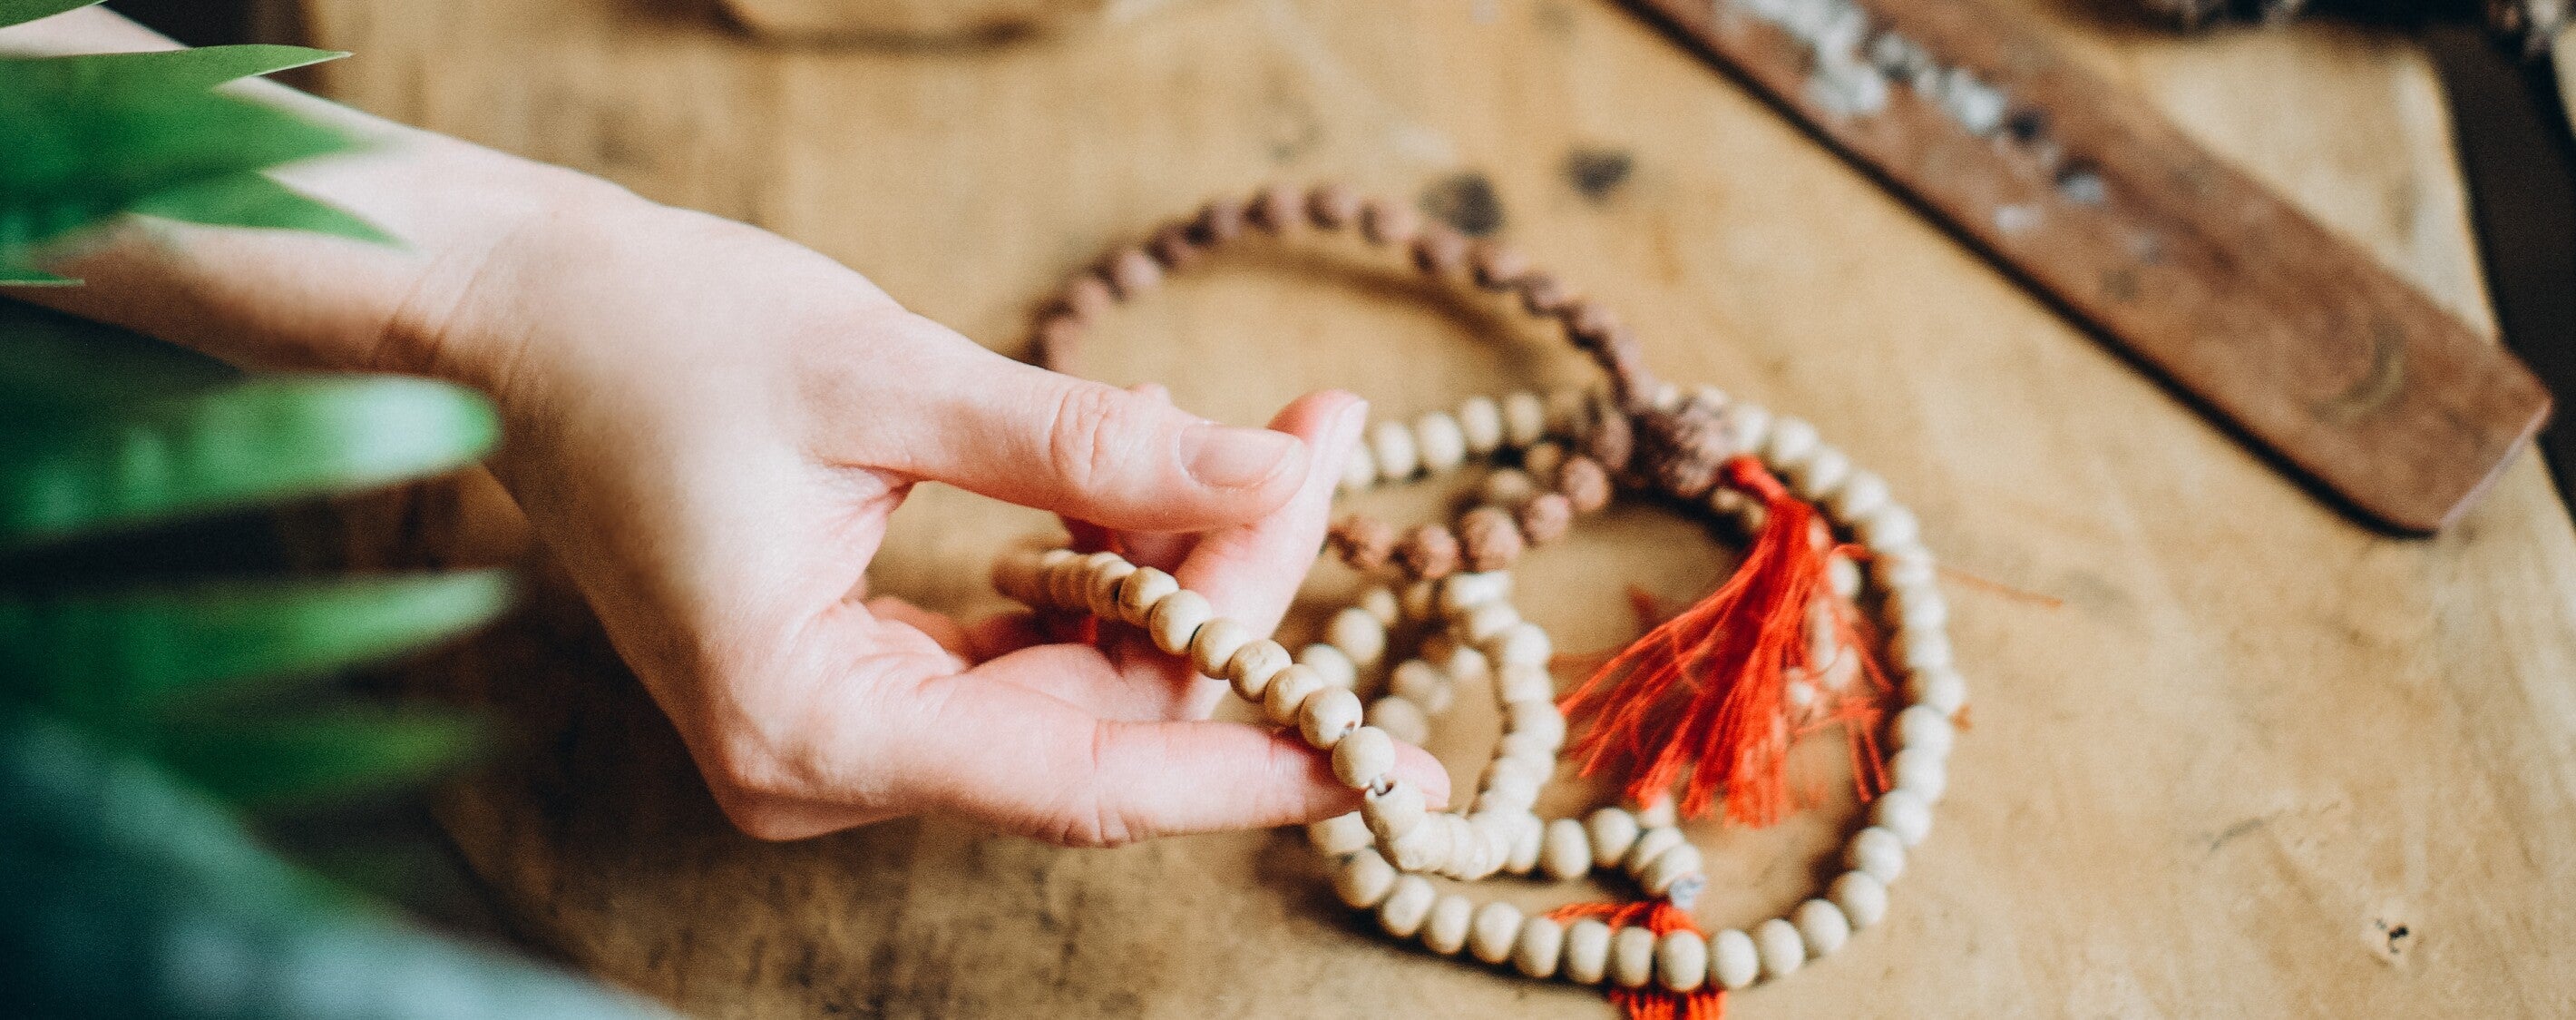 How to Use Mala Beads for Meditation 